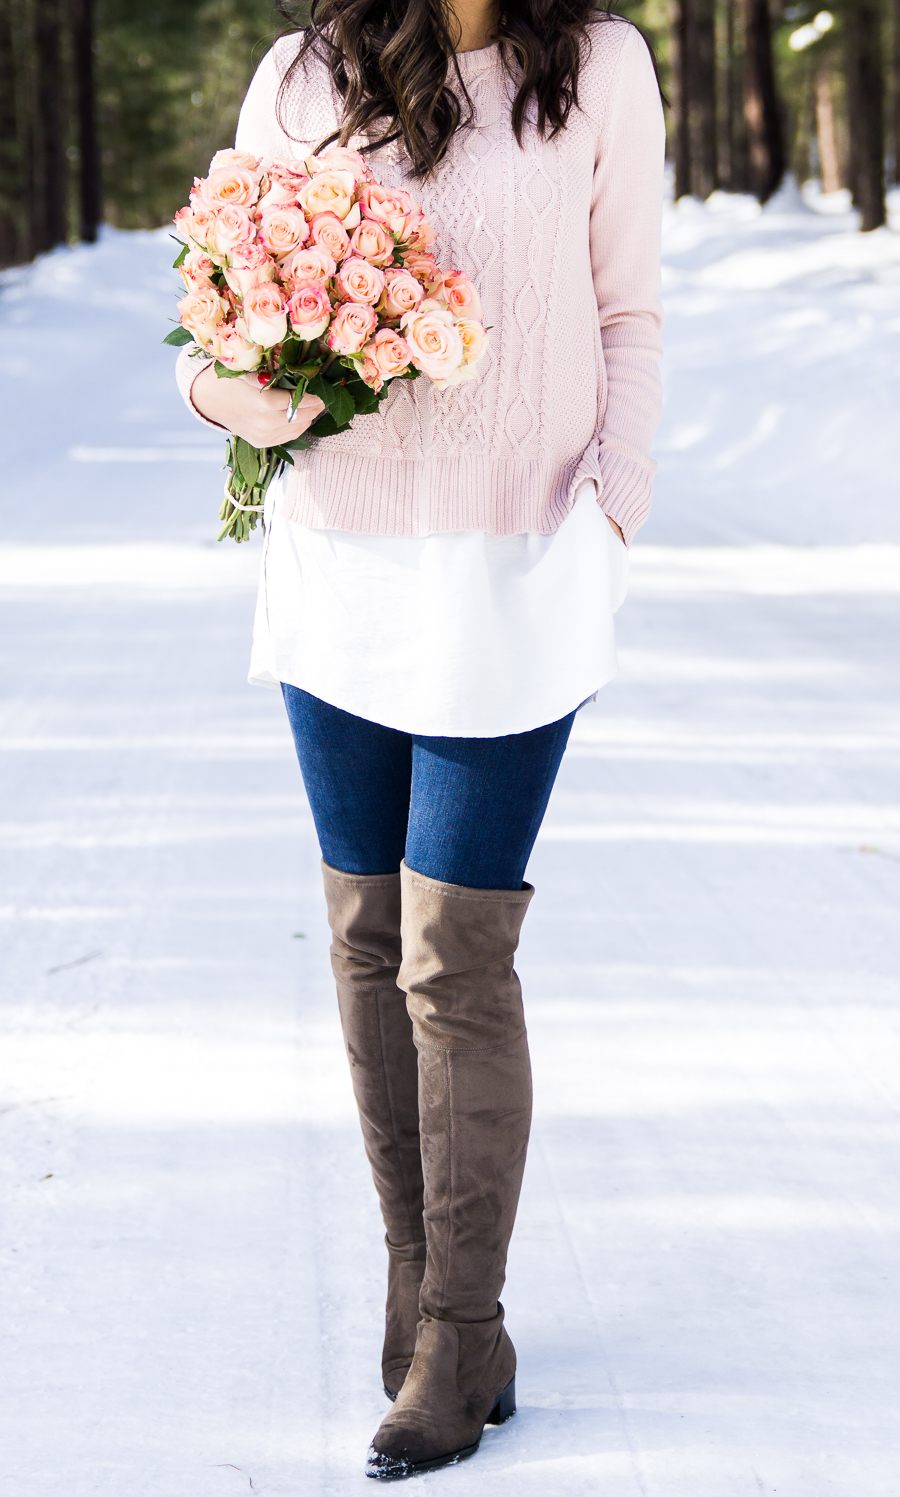 Cable knit sweater, pointed toe over the knee boots, cute casual winter outfit, Suncadia Resort with snow, petite fashion blog